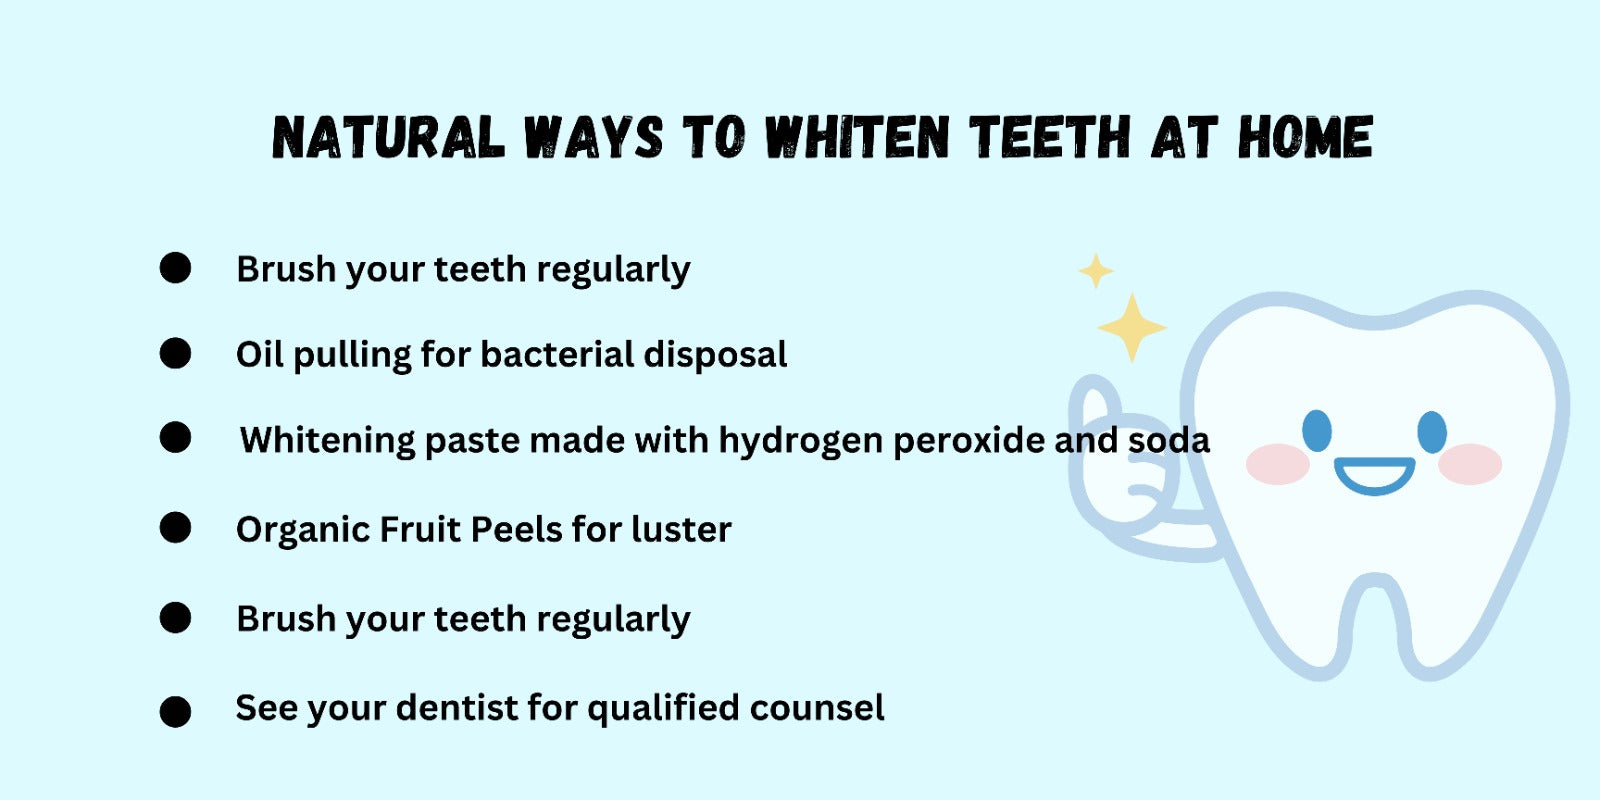 Natural ways to whiten teeth at home